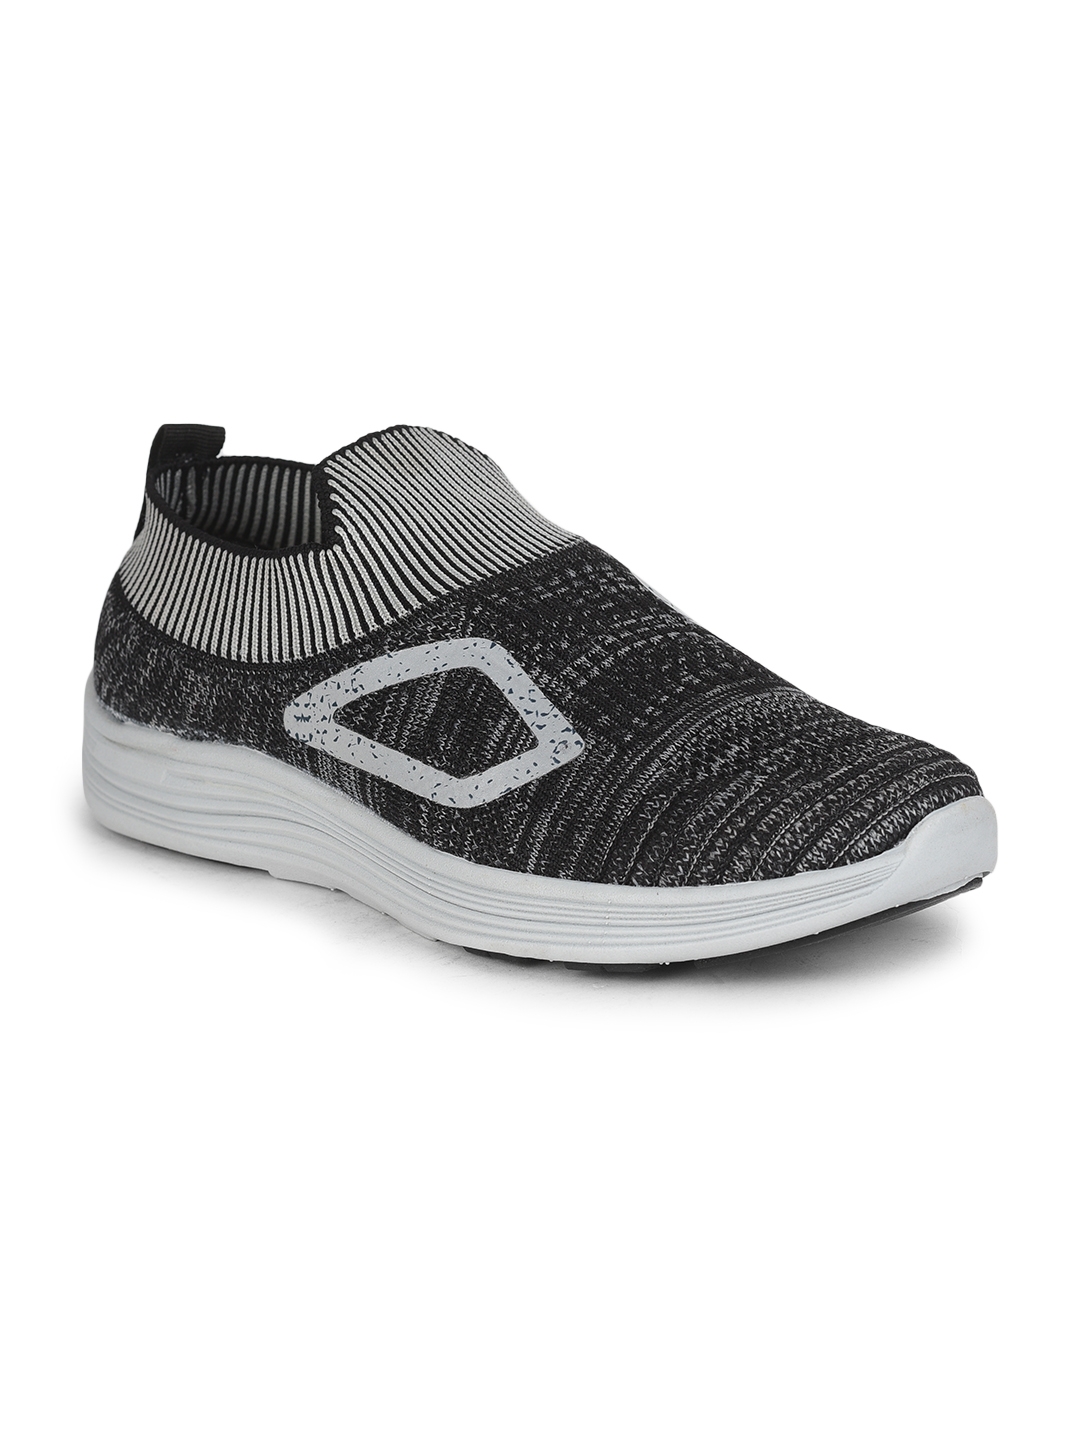 Liberty | LEAP7X by Liberty Sports Shoes Black IVORY For :- Ladies